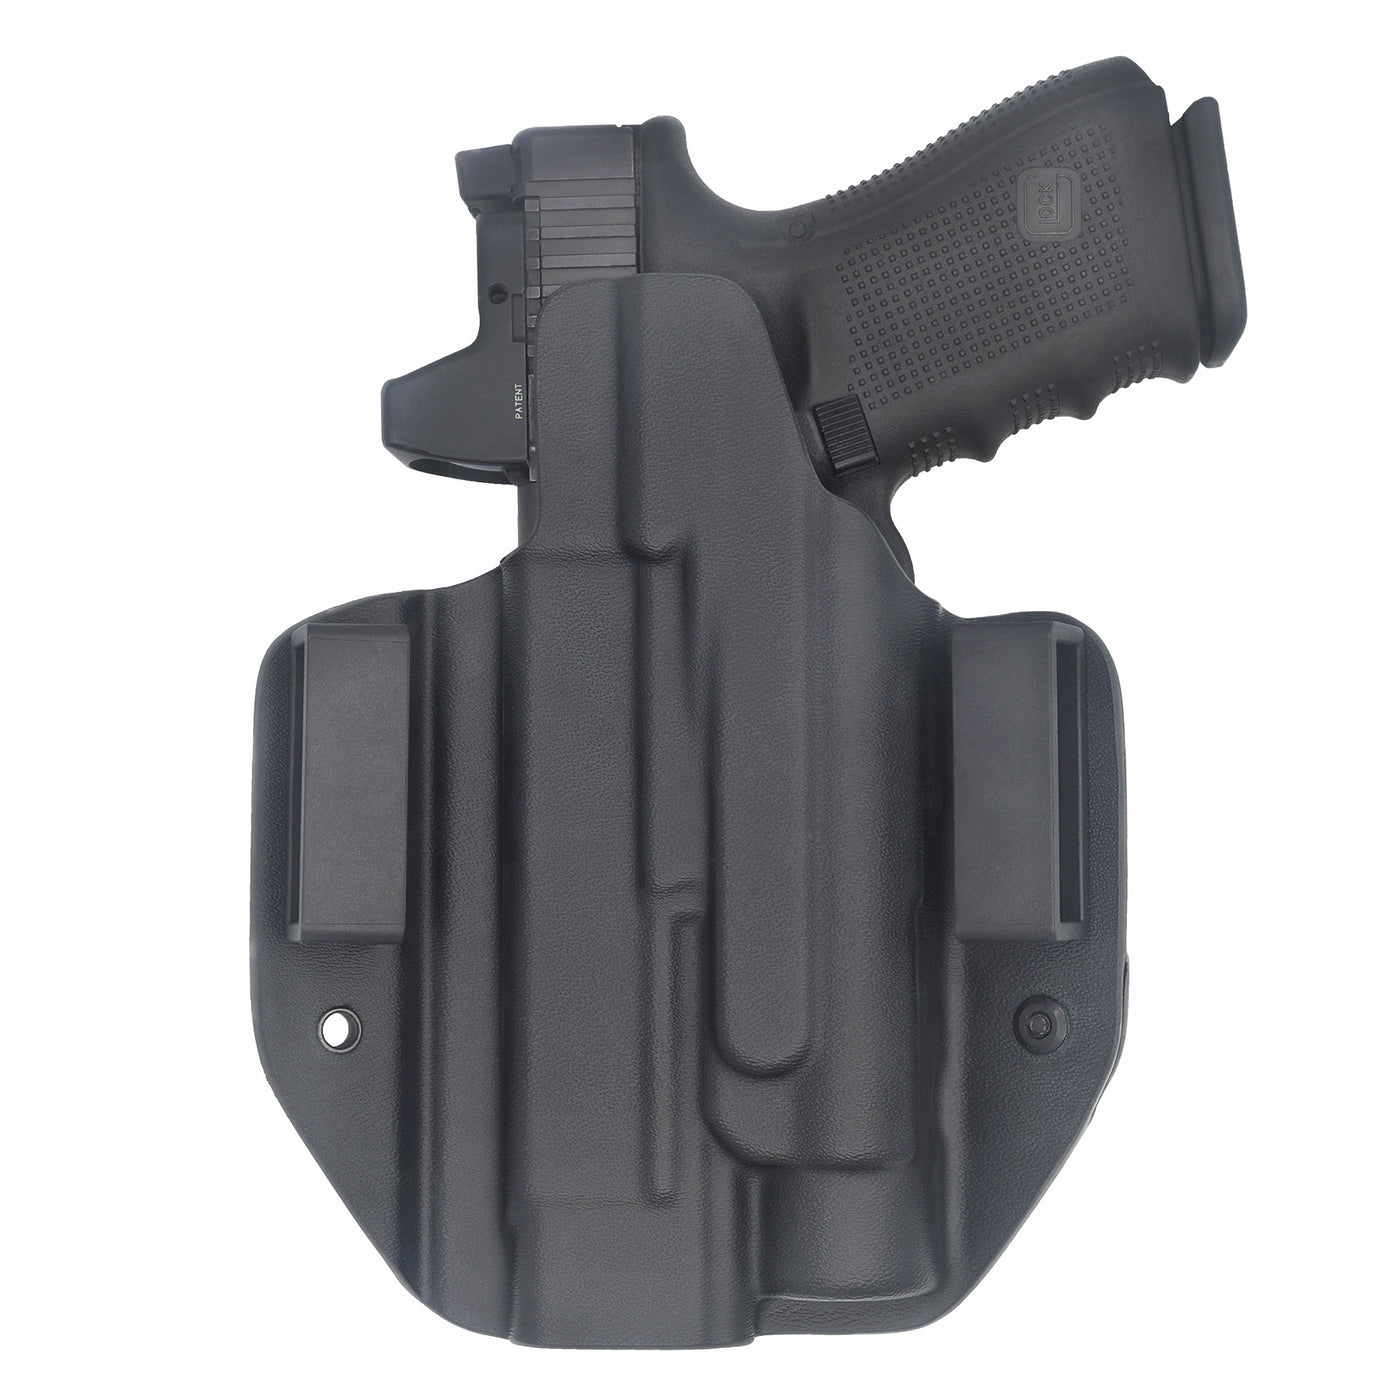 C&G Holsters custom OWB Tactical Glock 20/21 Streamlight TLR1 in holstered position back view